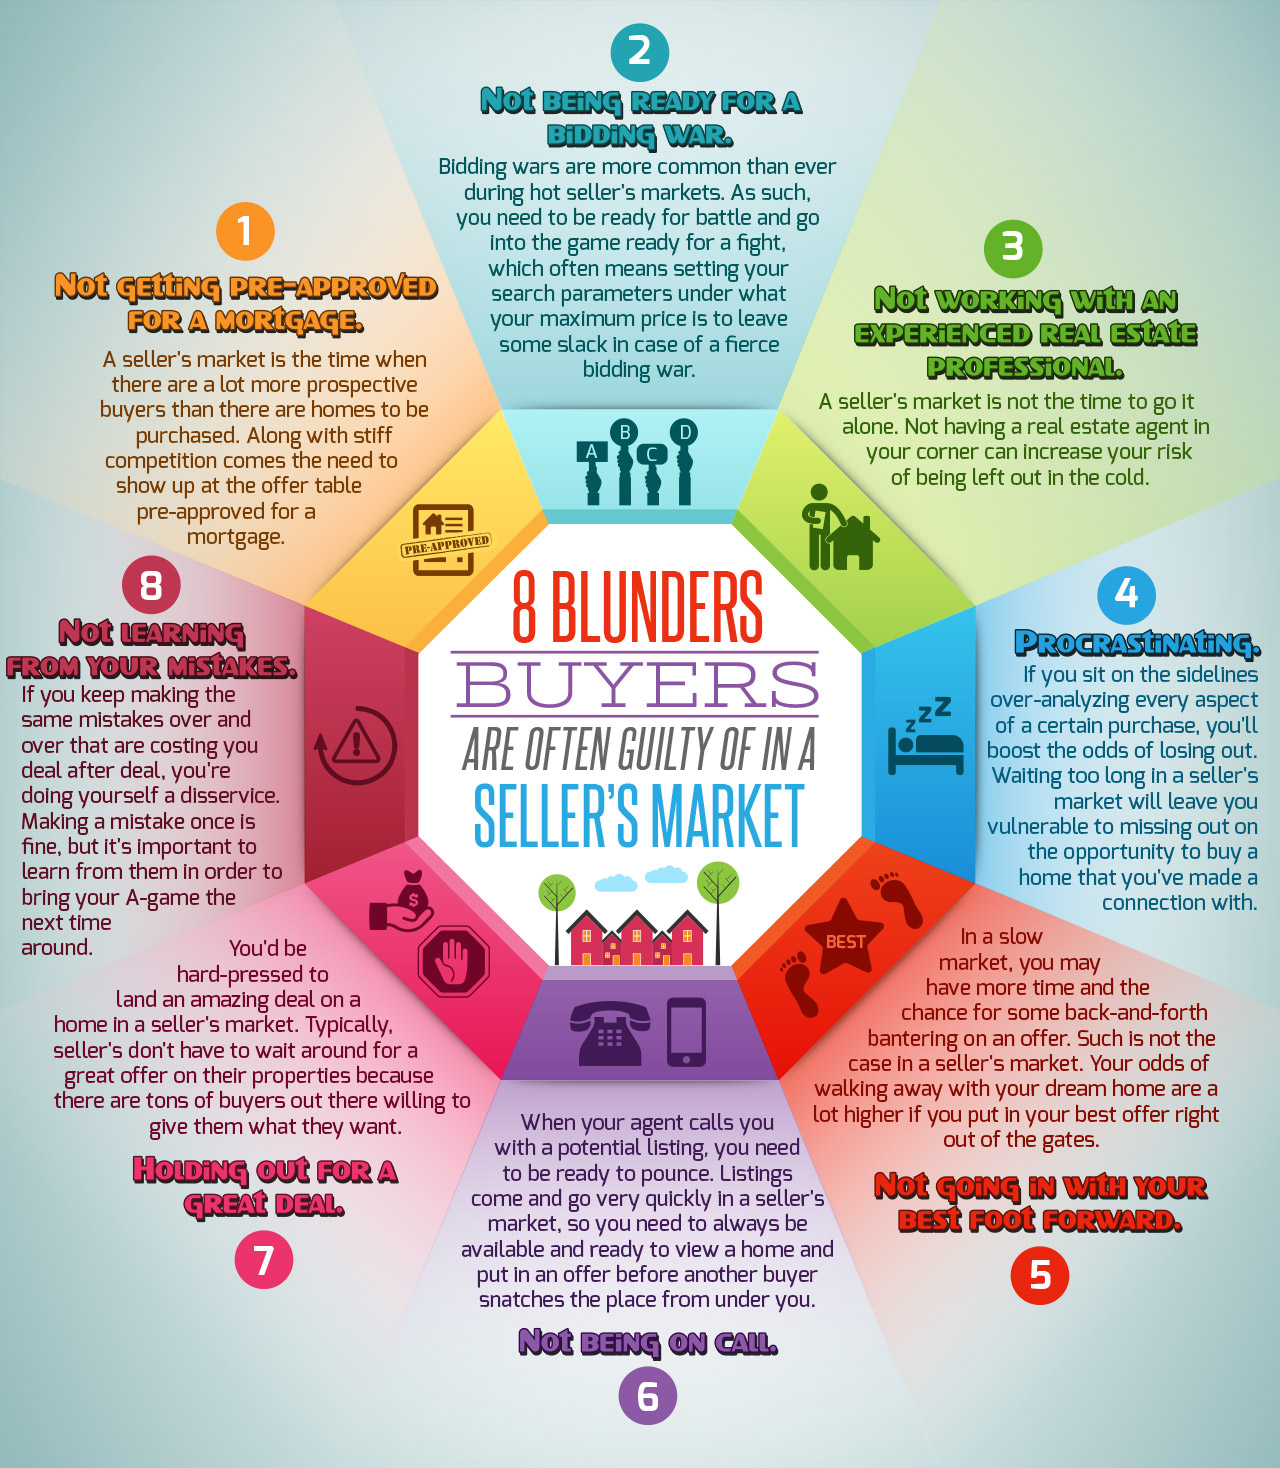 8-blunders-buyers-are-often-guilty-of-in-a-sellers-market-infographic